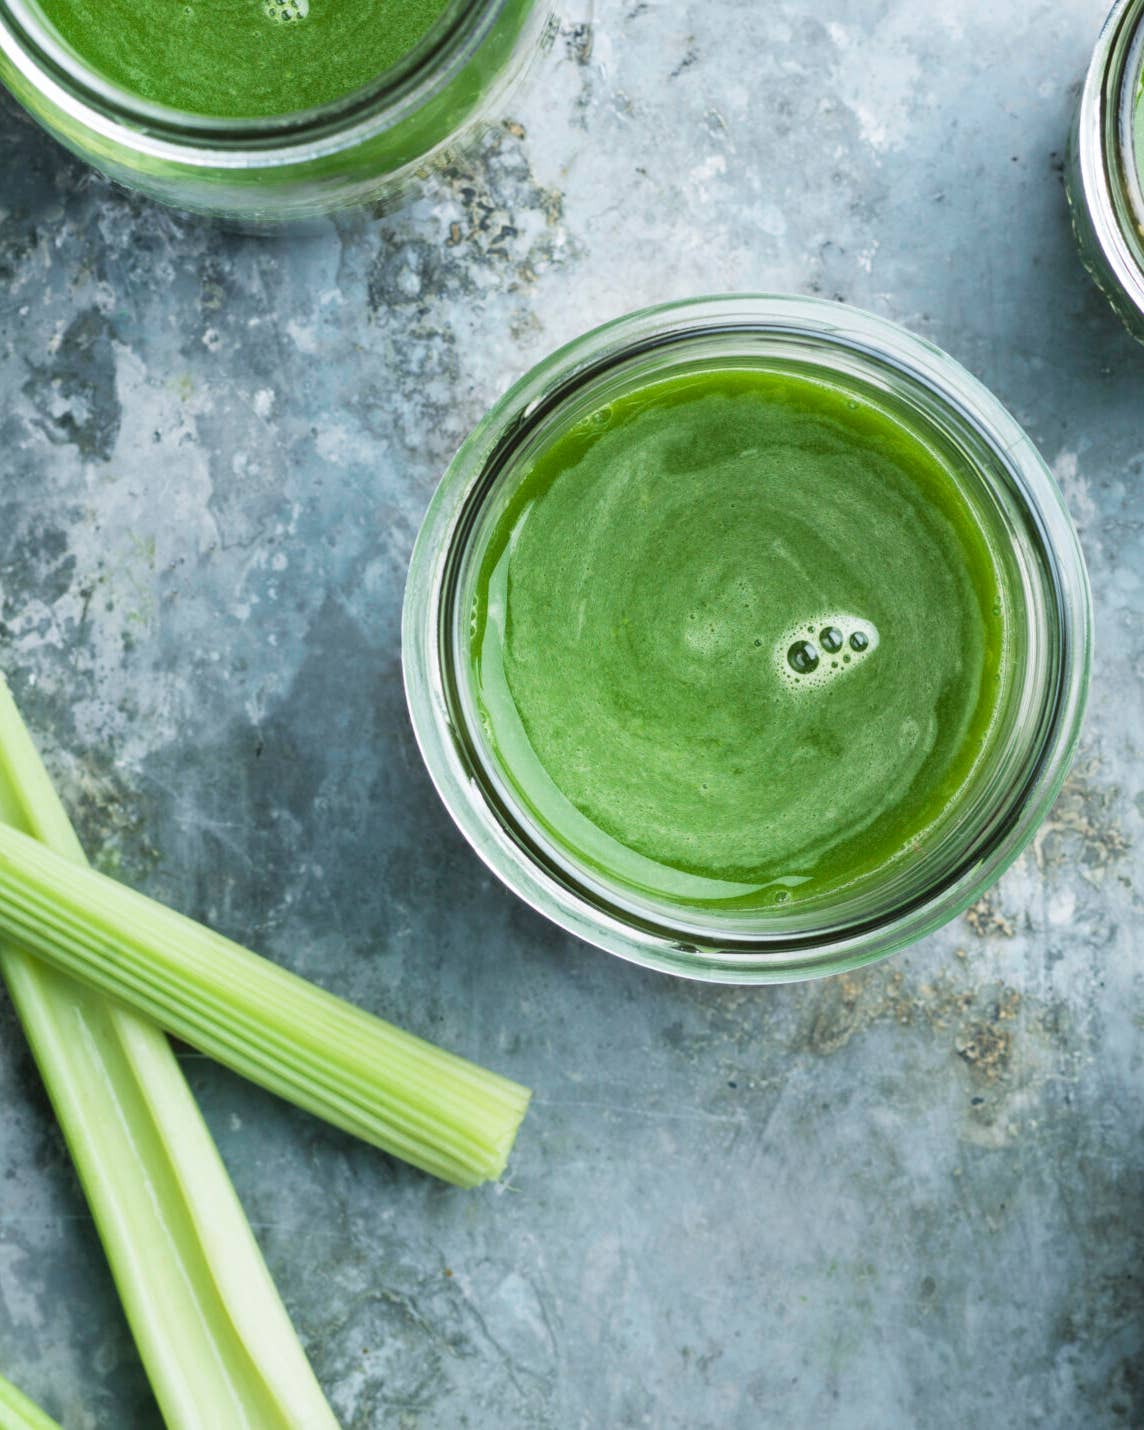 The Best Juicers for Celery Squeeze Tough Produce With Ease